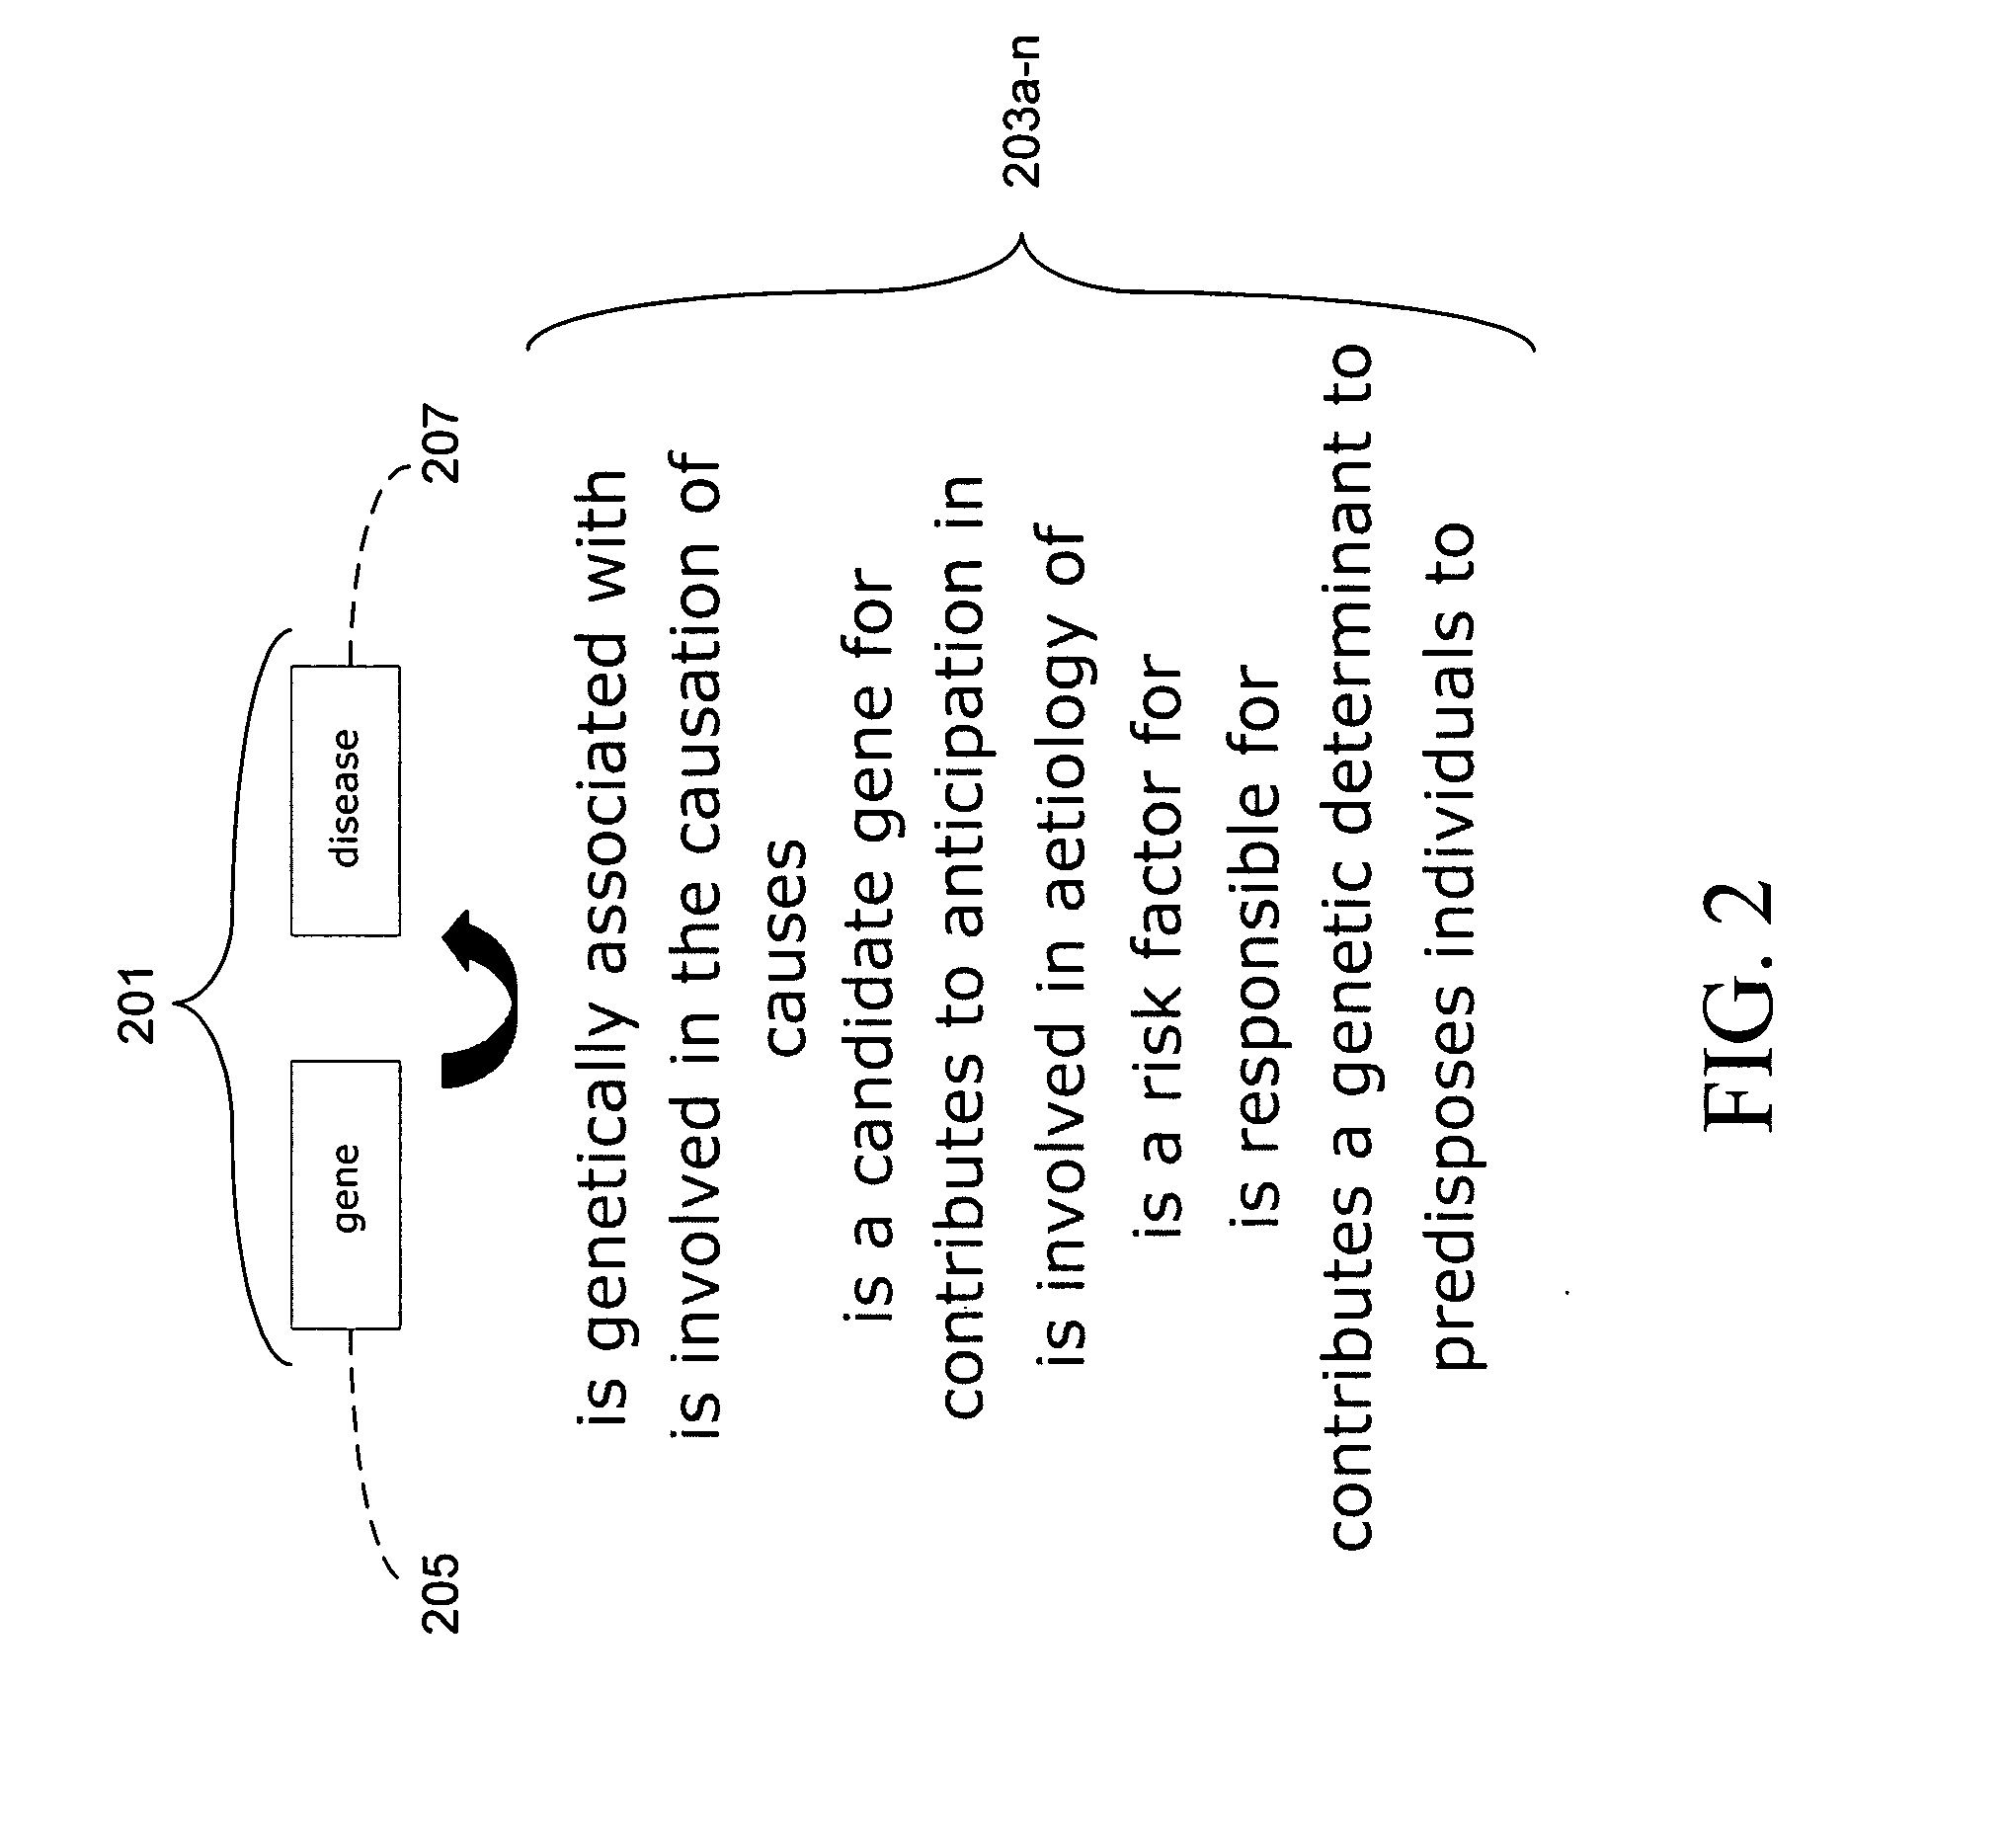 System and method for creating, editing, and utilizing one or more rules for multi-relational ontology creation and maintenance